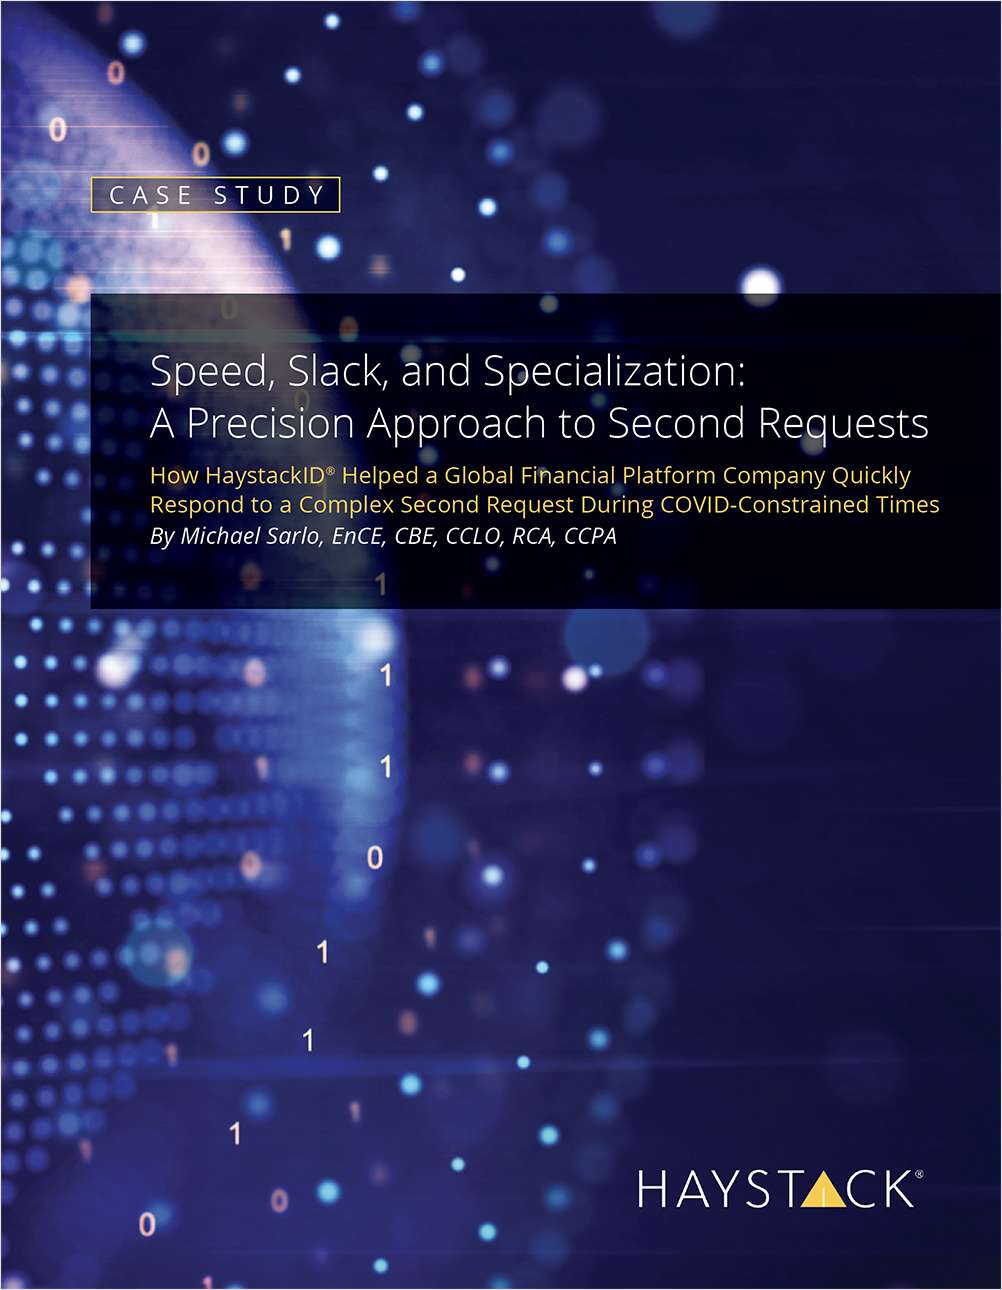 Speed, Slack and Specialization: A Precision Approach to Second Requests